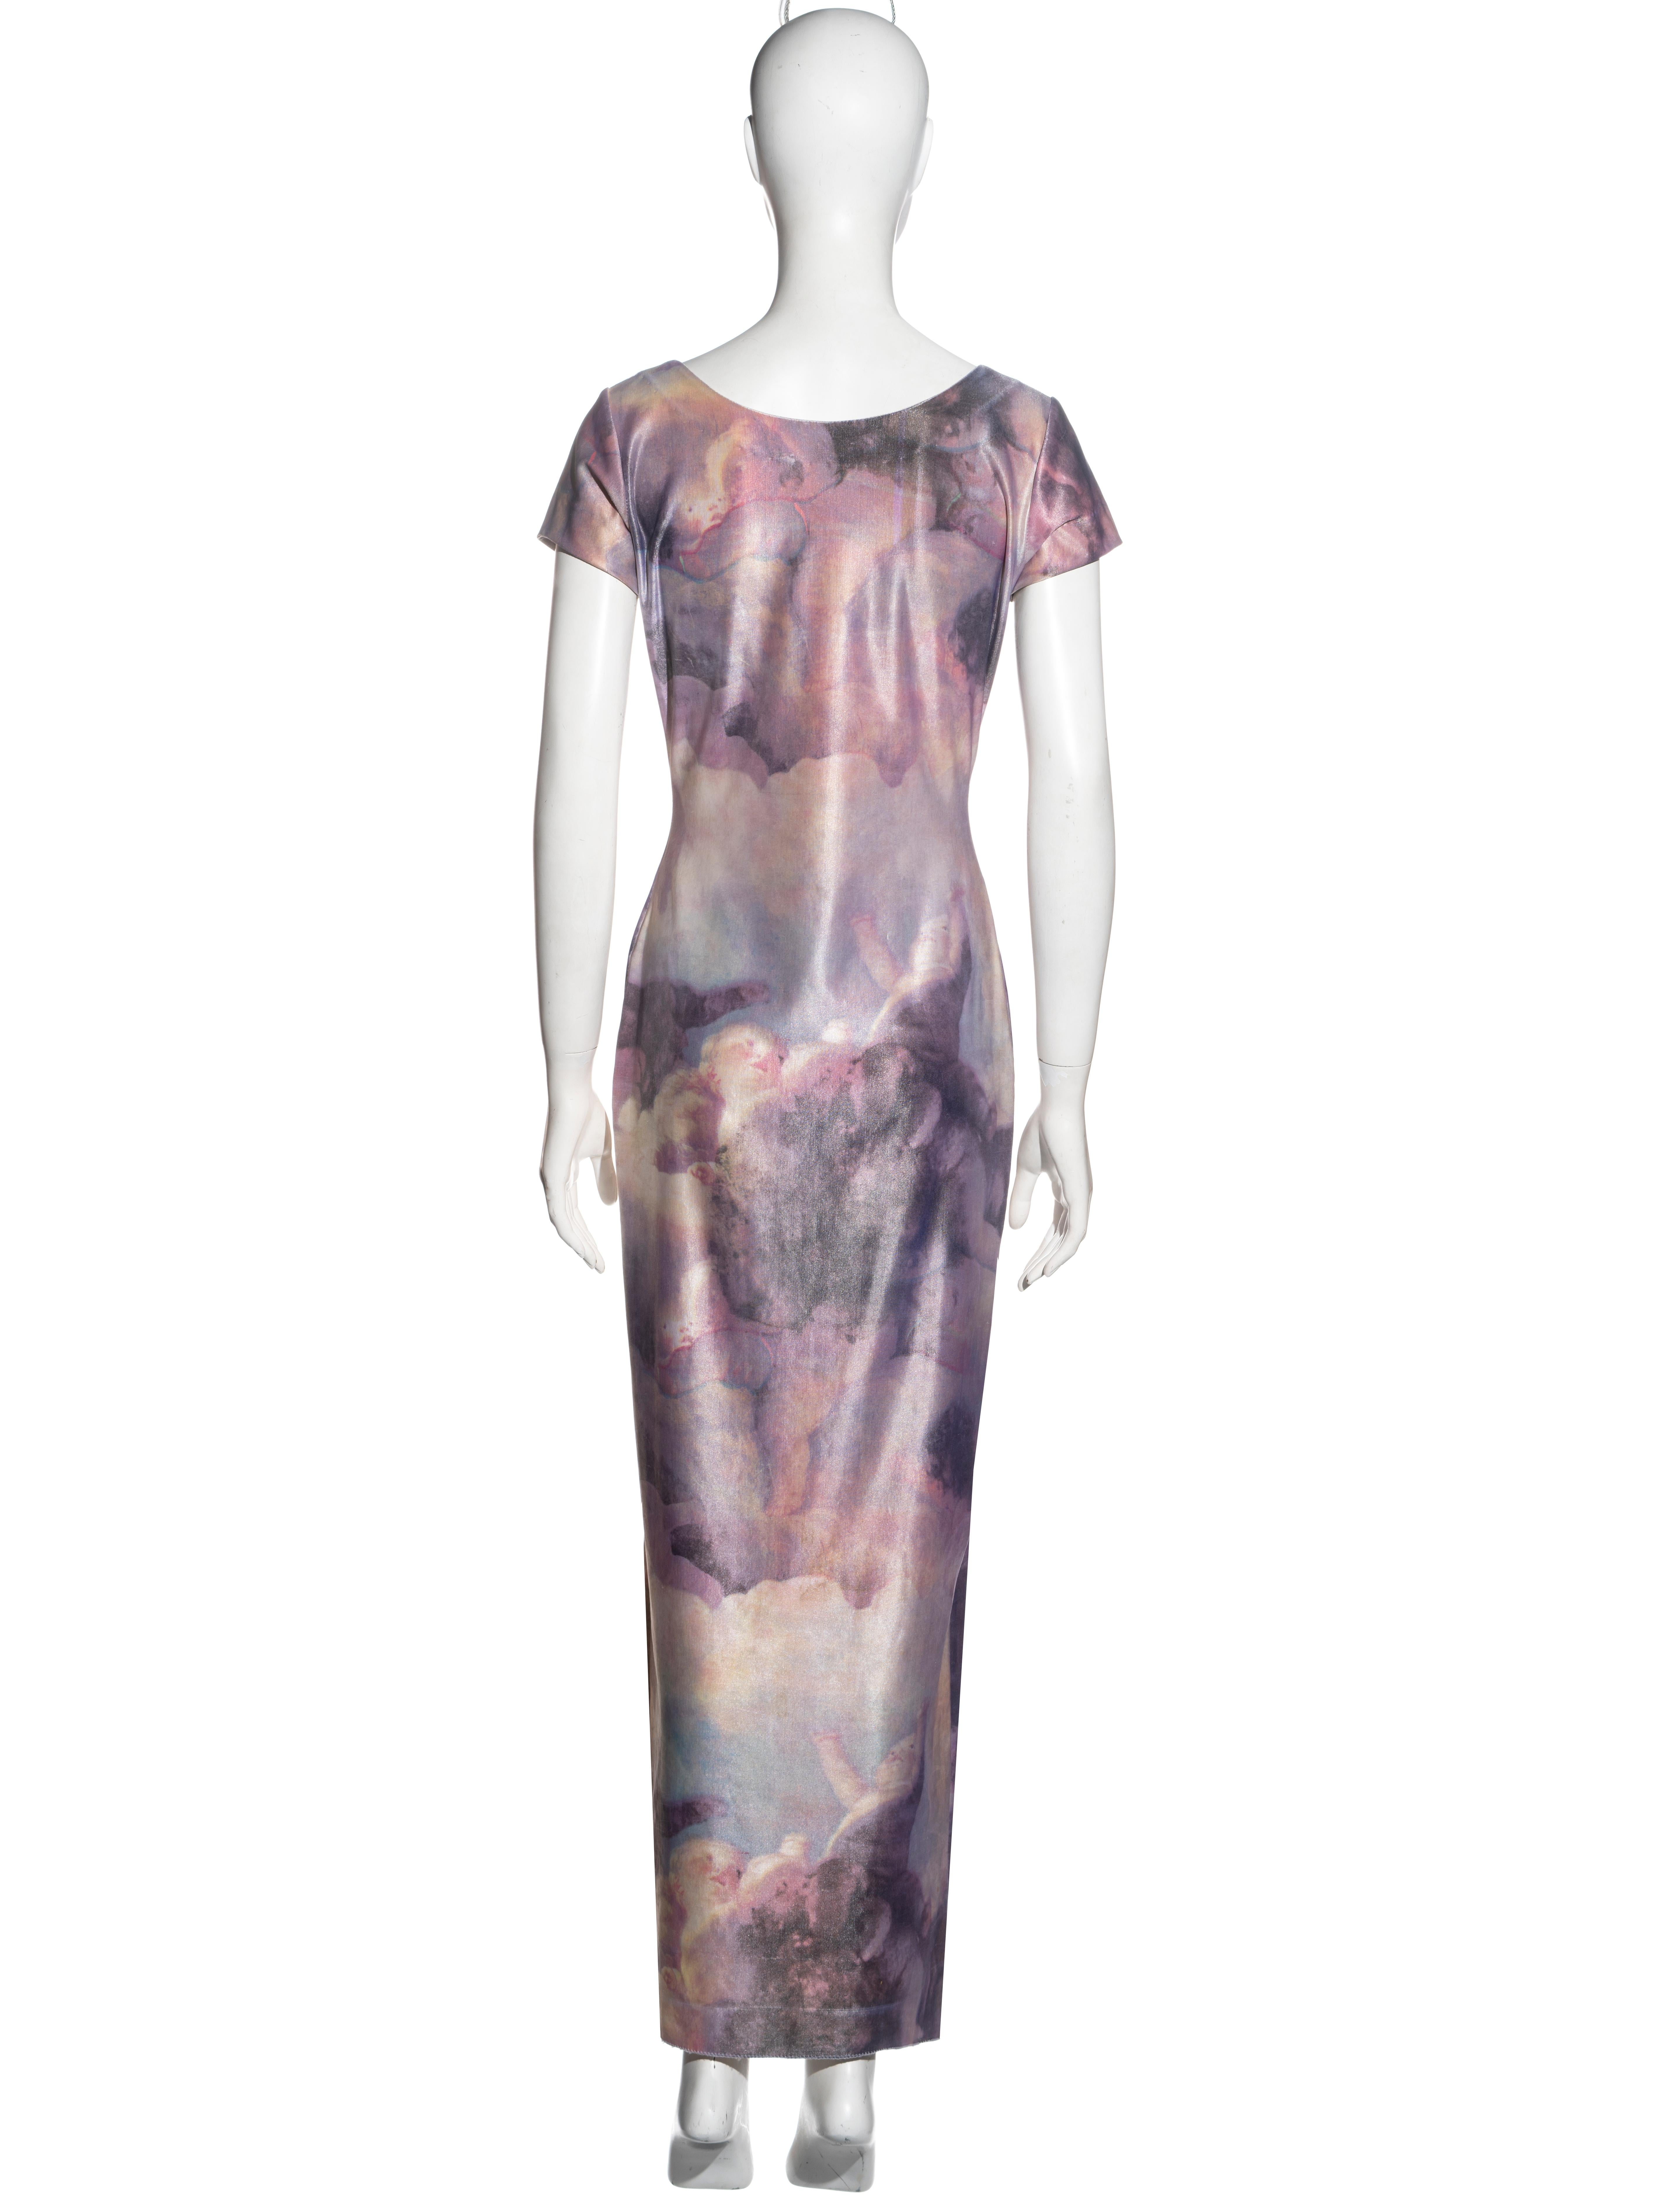 Vivienne Westwood evening maxi dress with cupid print, fw 1991 For Sale 3